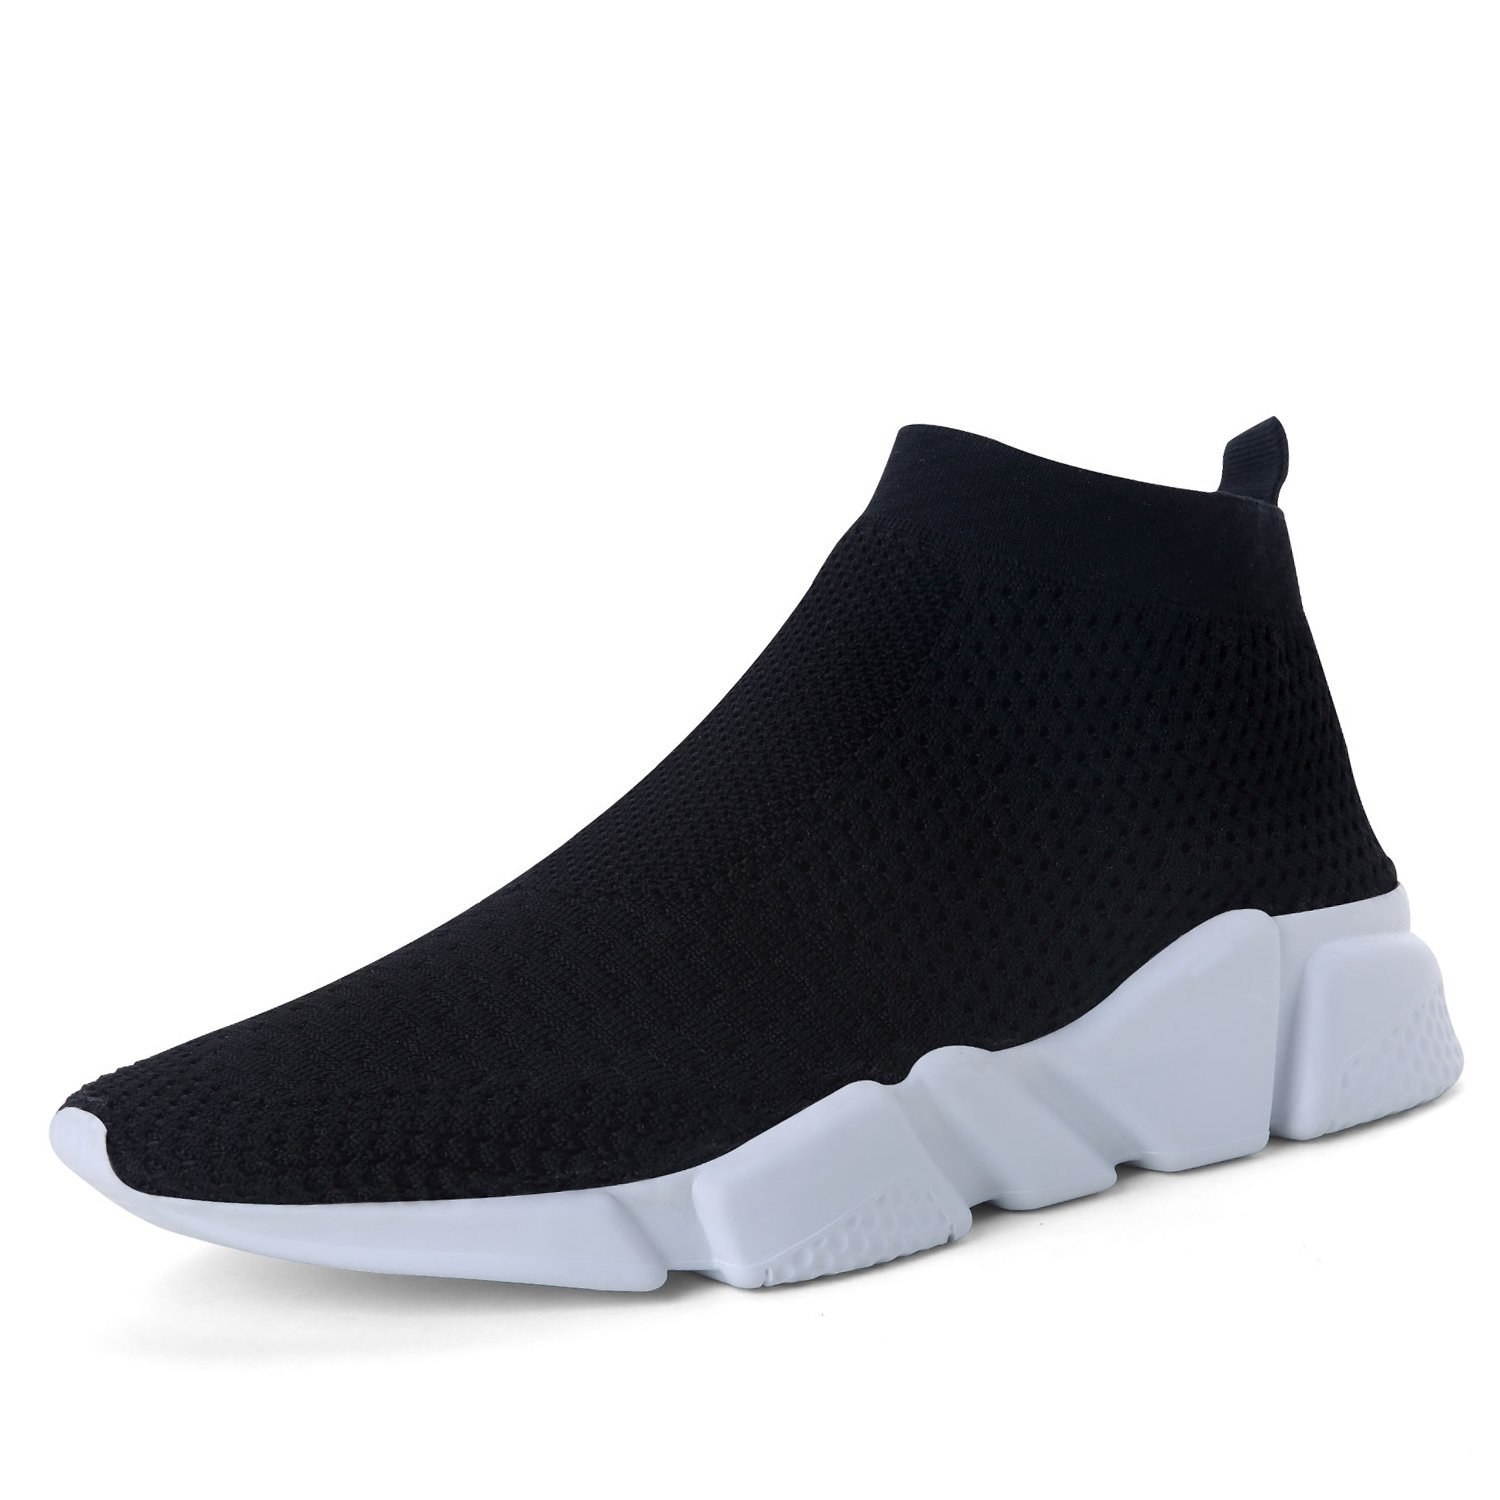 19 Pairs Of Comfy AF Sock Sneakers For 